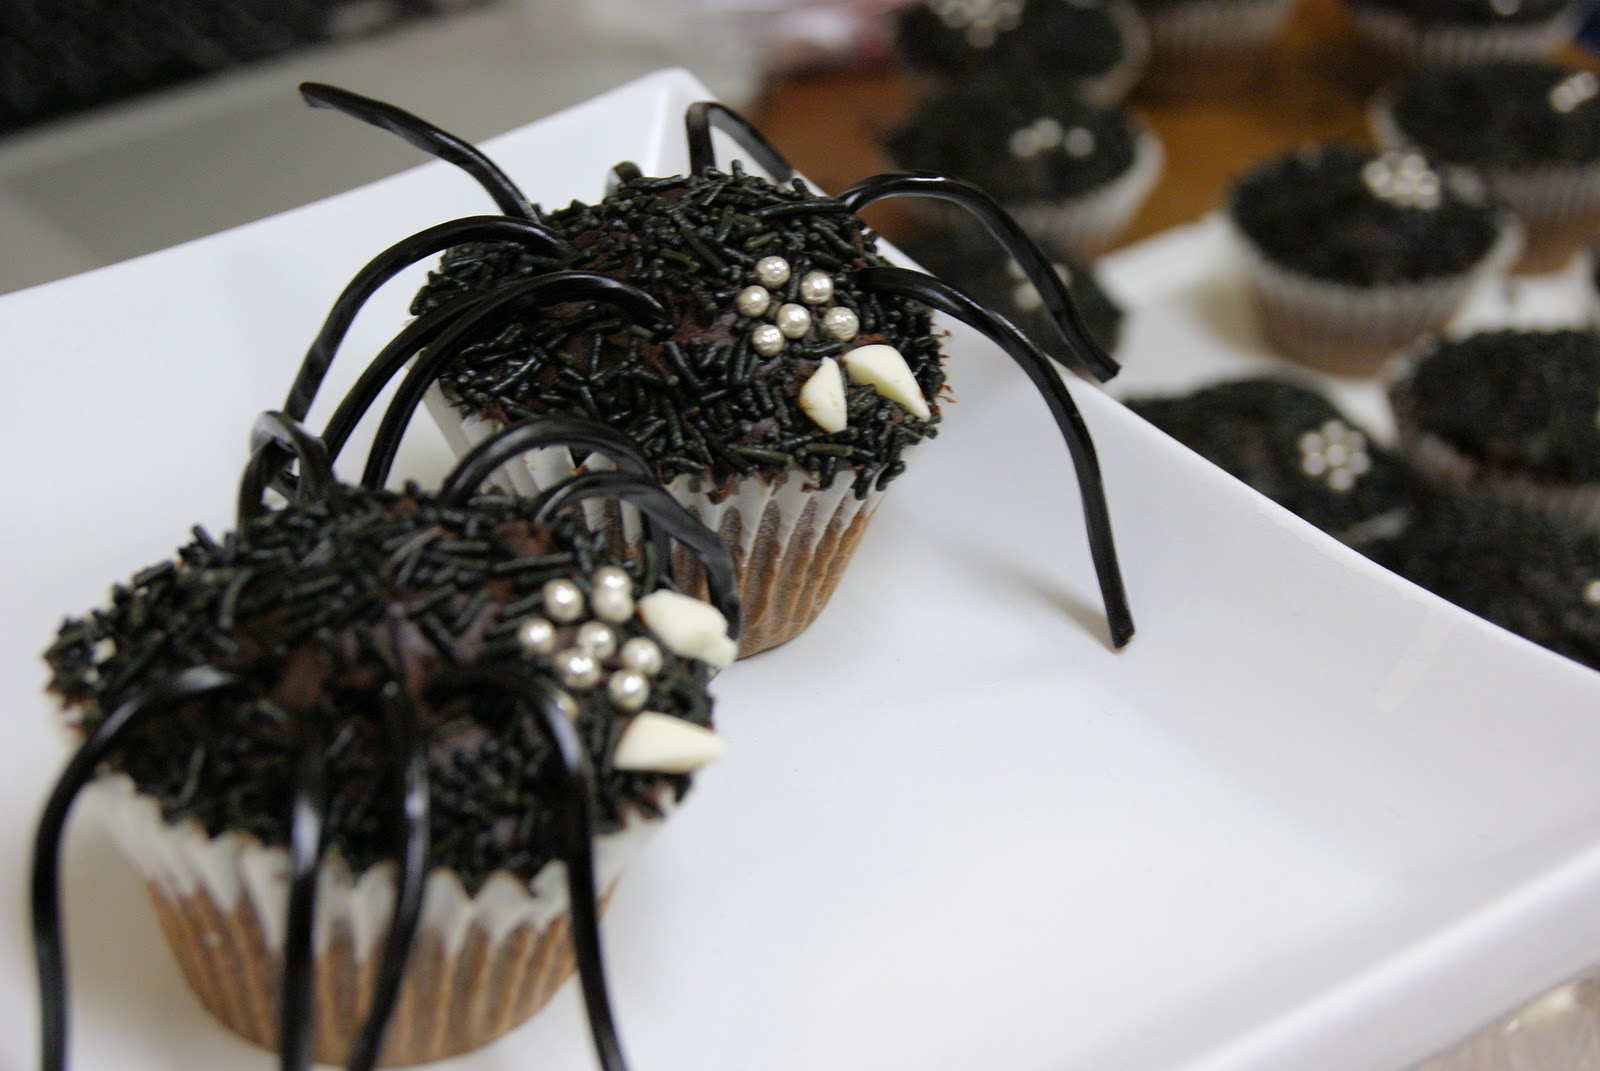 Recipe for Spider Cupcakes made from devils food with Ganache frosting